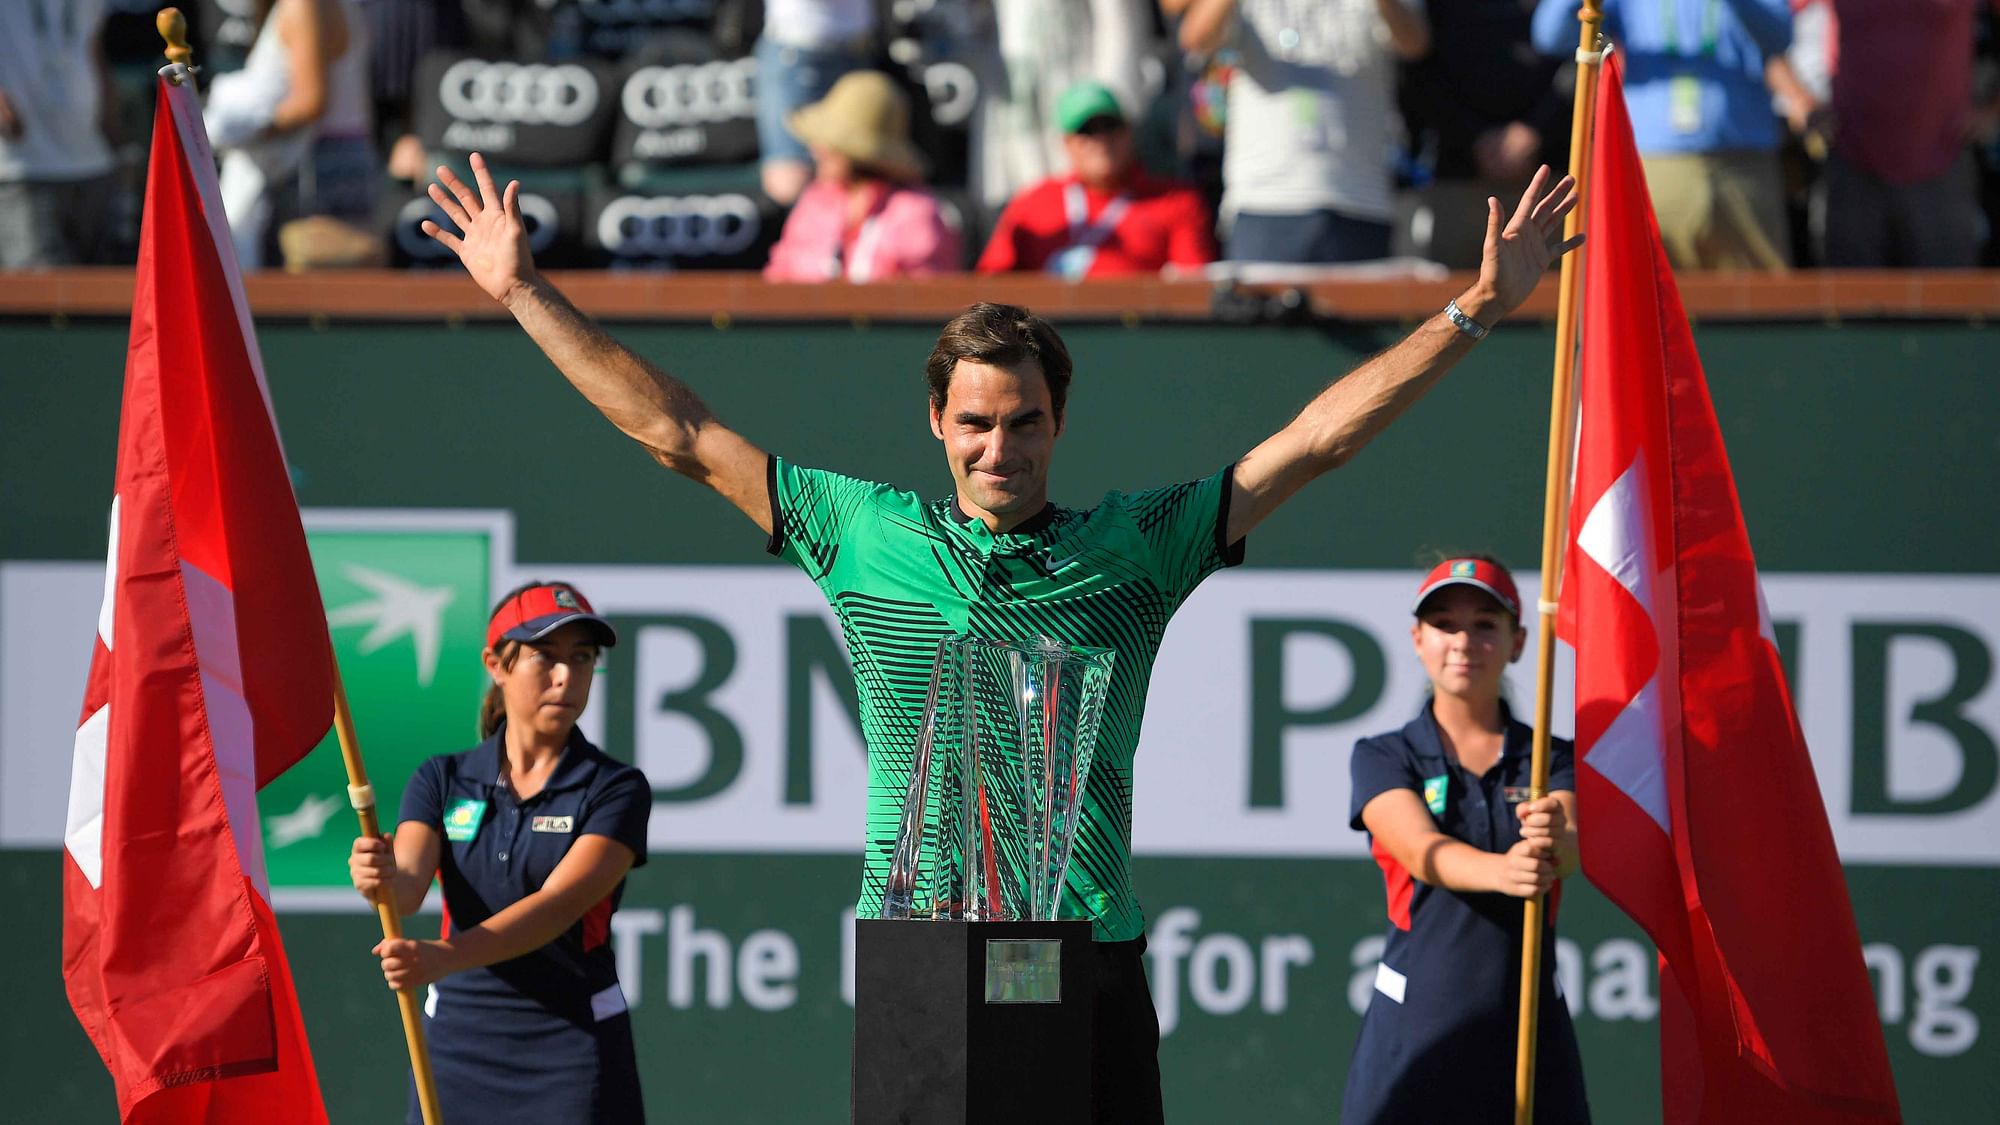 Roger Federer, of Switzerland, poses with the trophy after his win against Stanislas Wawrinka, of Switzerland, in the finals of the BNP Paribas Open. (Photo: AP)